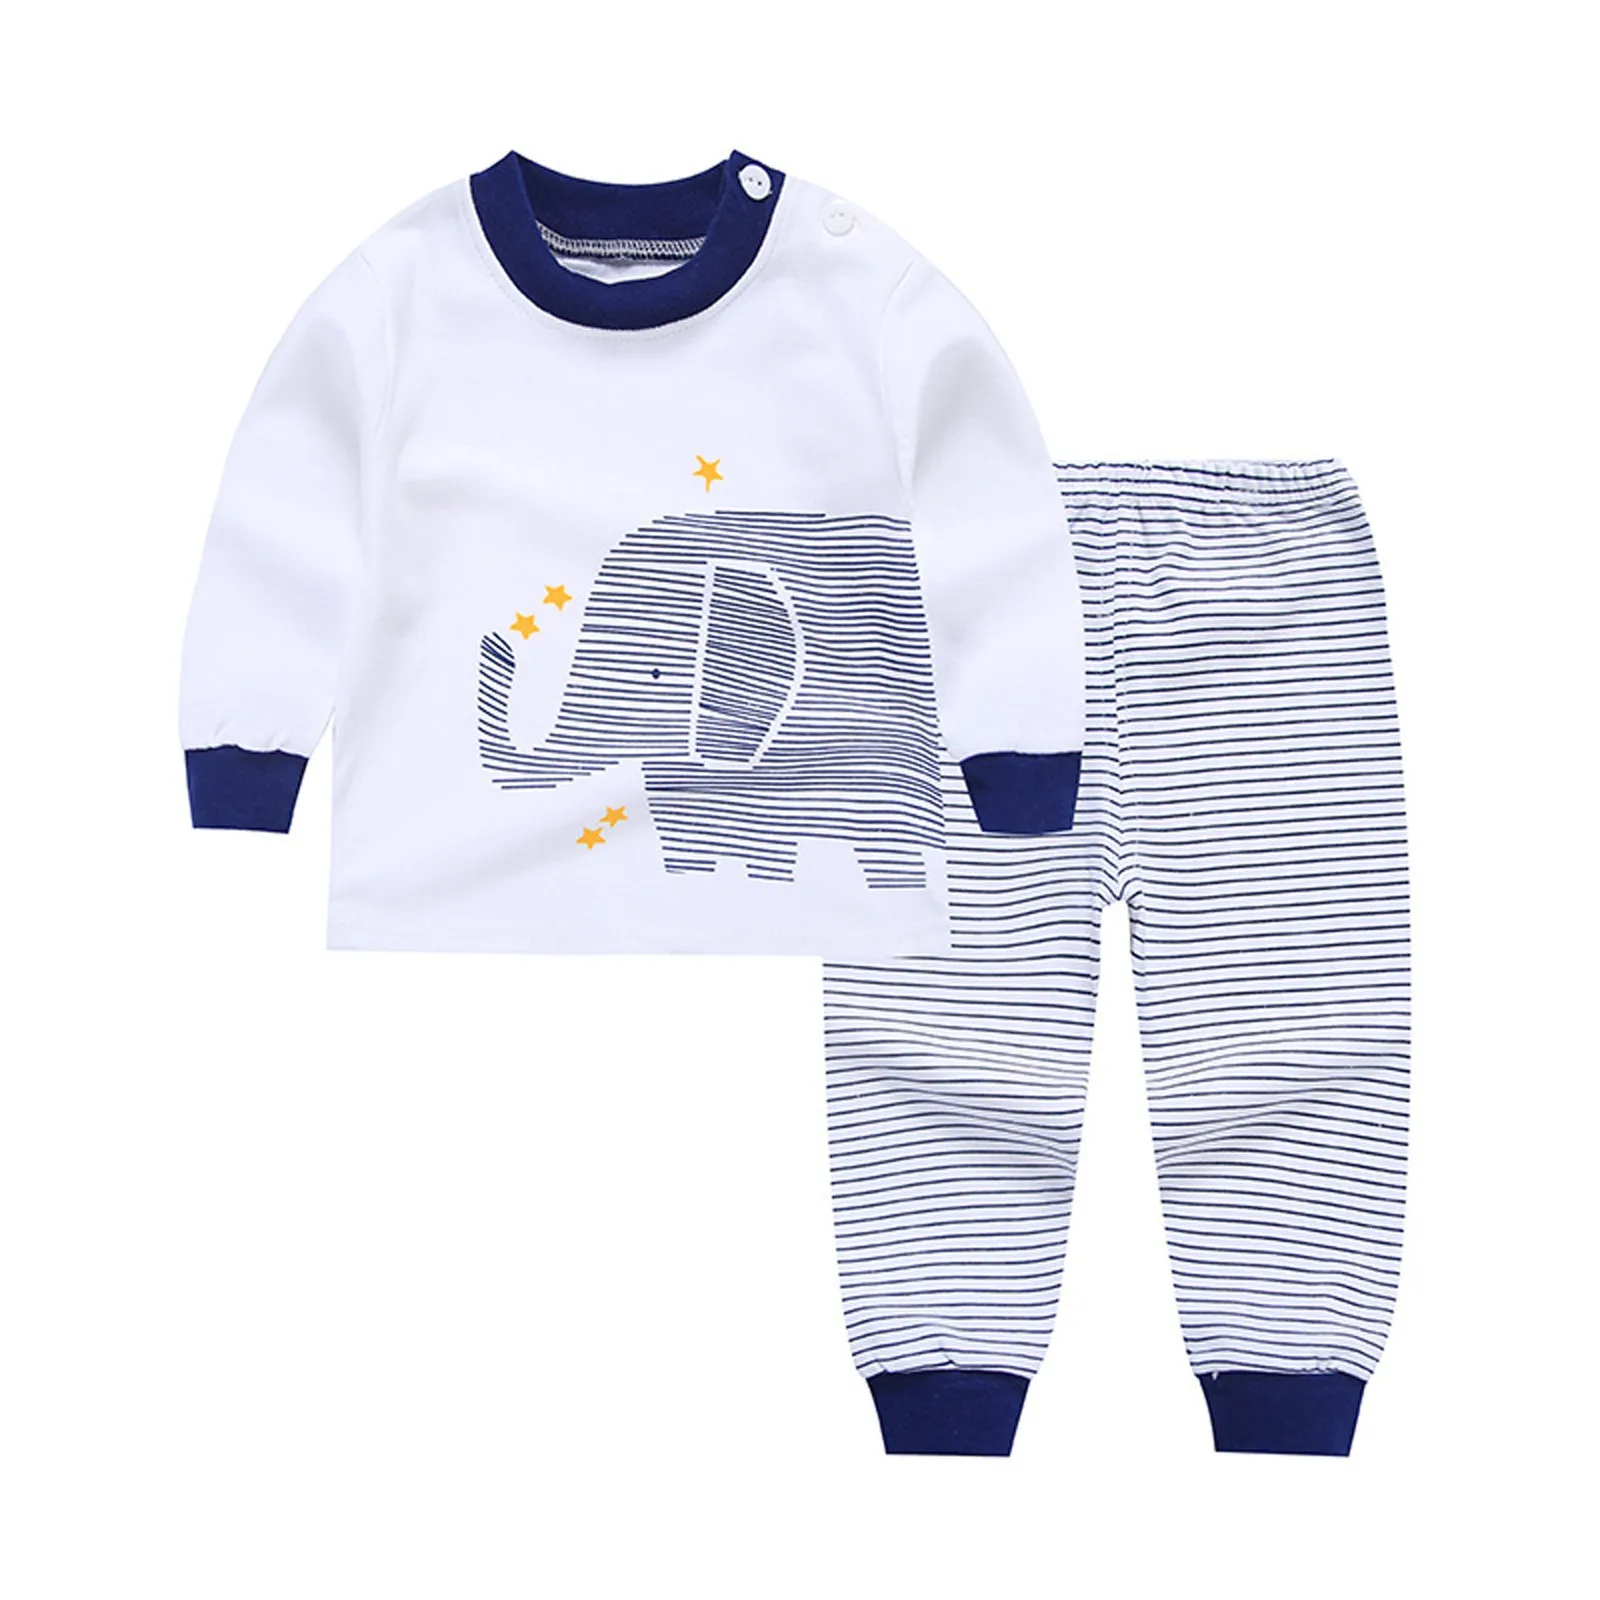 

Infant Baby Kids Boys Girls Summer Autumn Fall Outfits Long-Slevees + Pants Clothing Sets For Children Girl Clothes 아동 상하복 세트